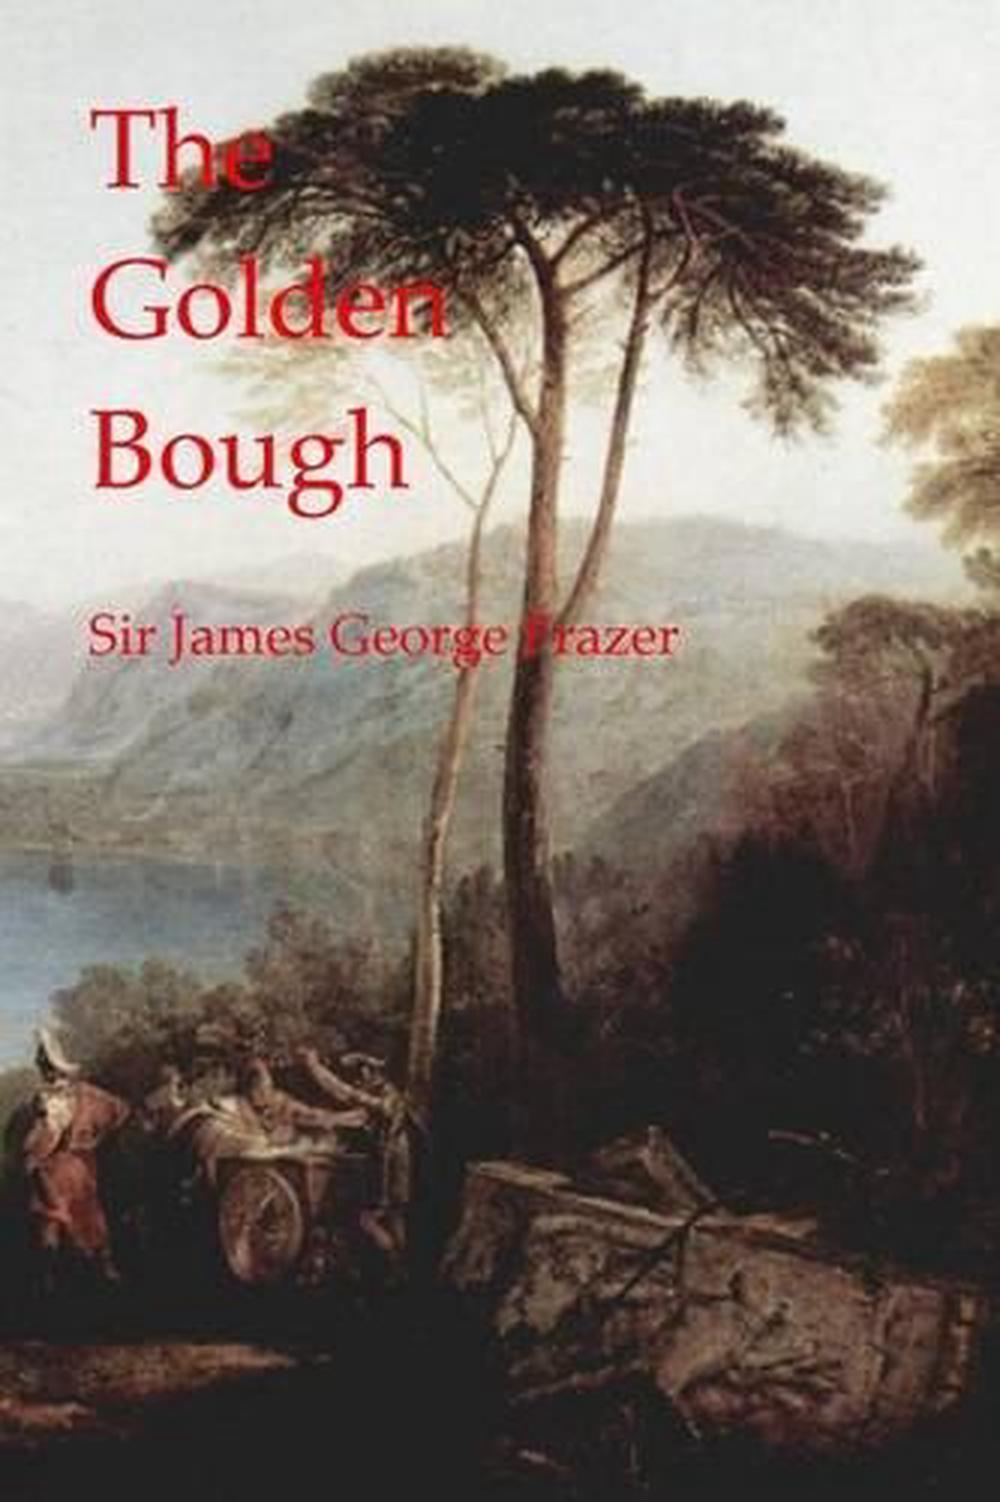 the golden bough by james george frazer